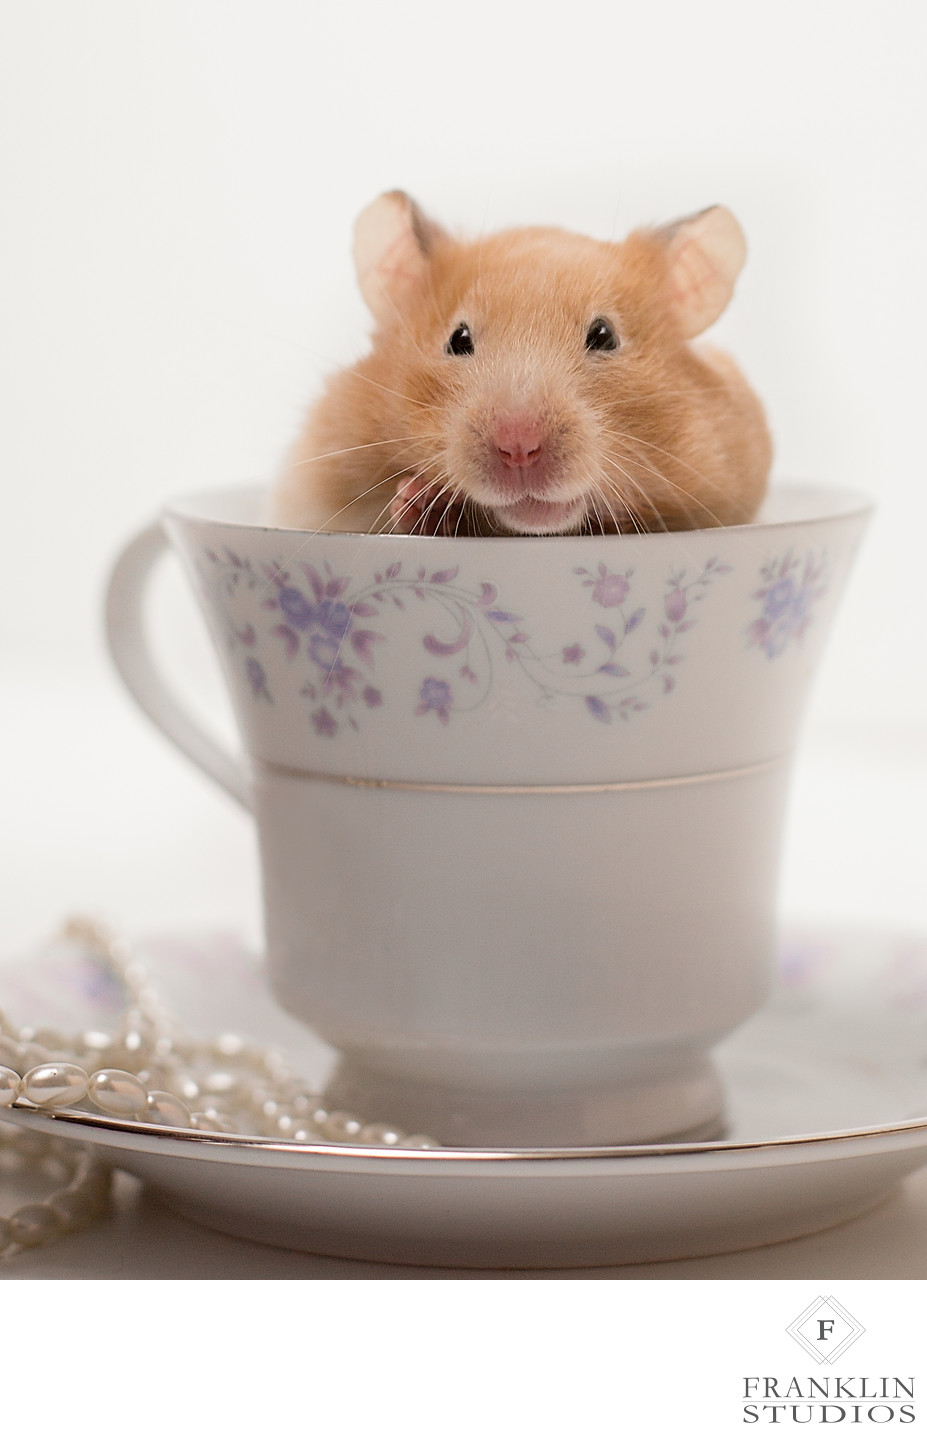 Adorable Photo of a Hamster in a Tea Cup